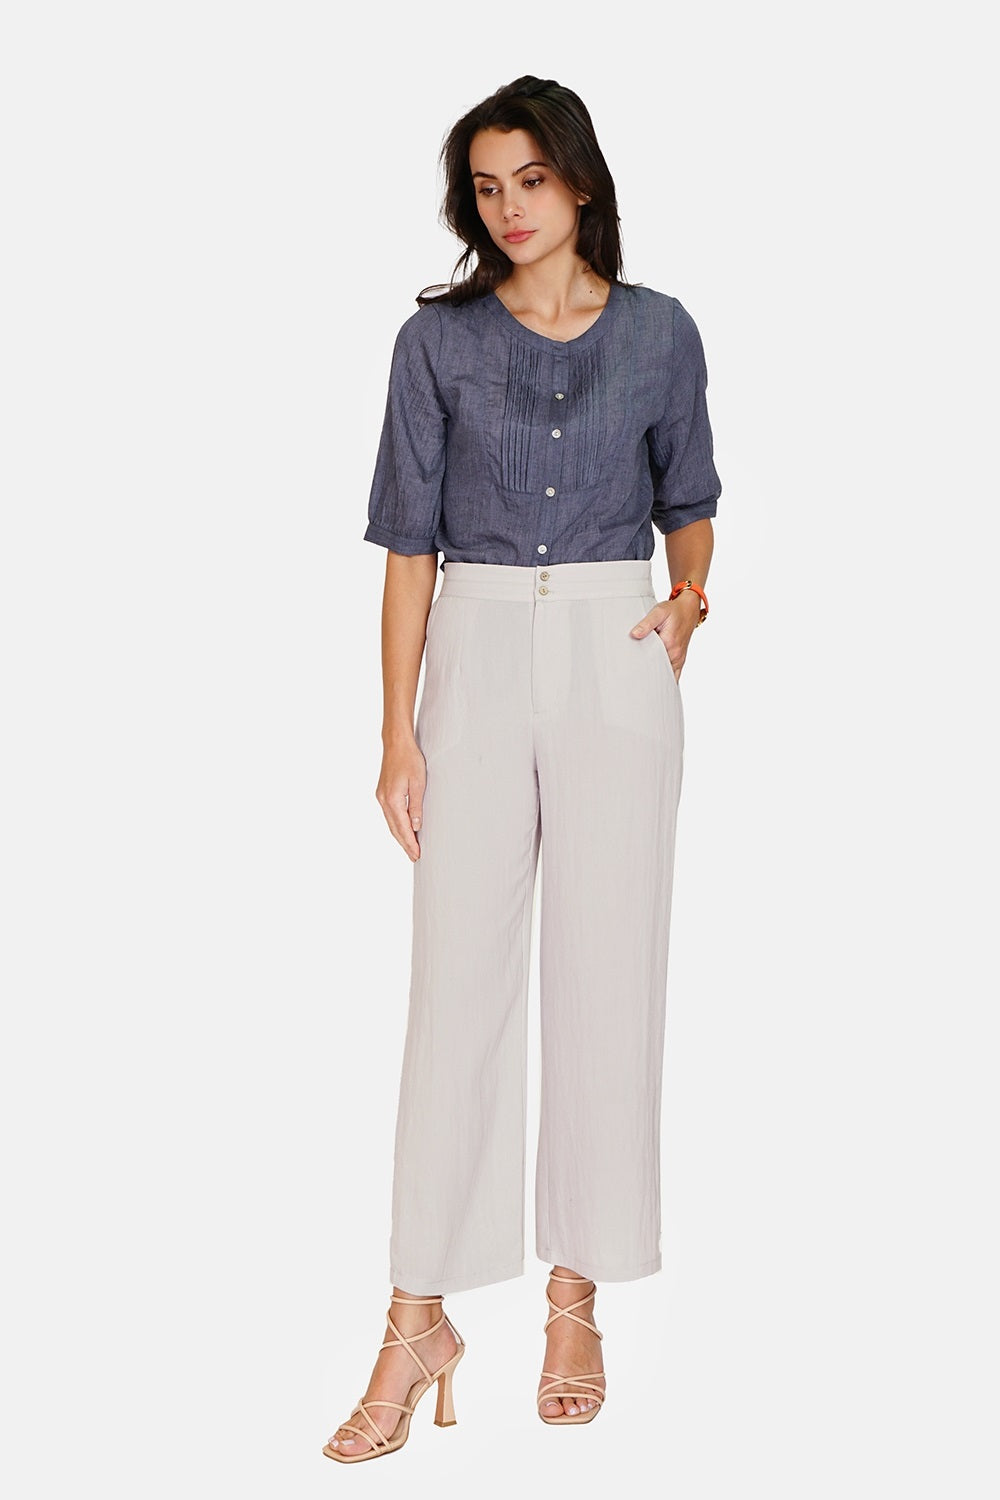 Wide pants with fancy belt zip closure and high waist button